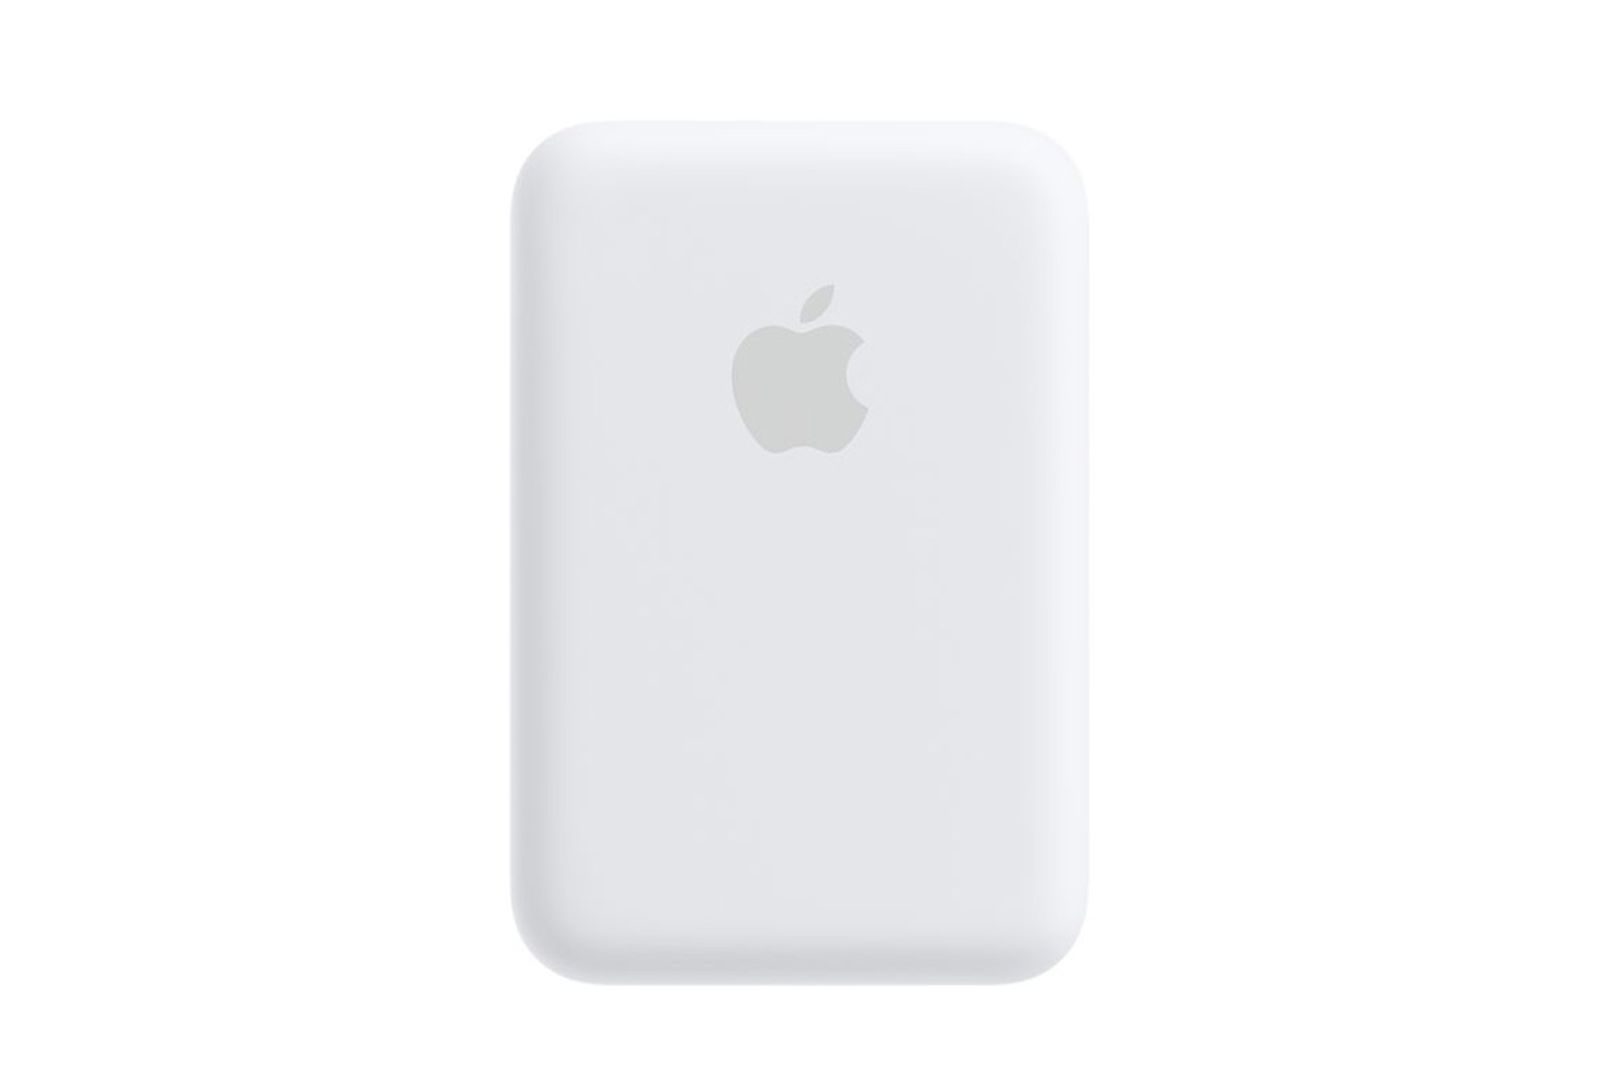 apple-magsafe-wireless-battery-pack-iphone-12-03